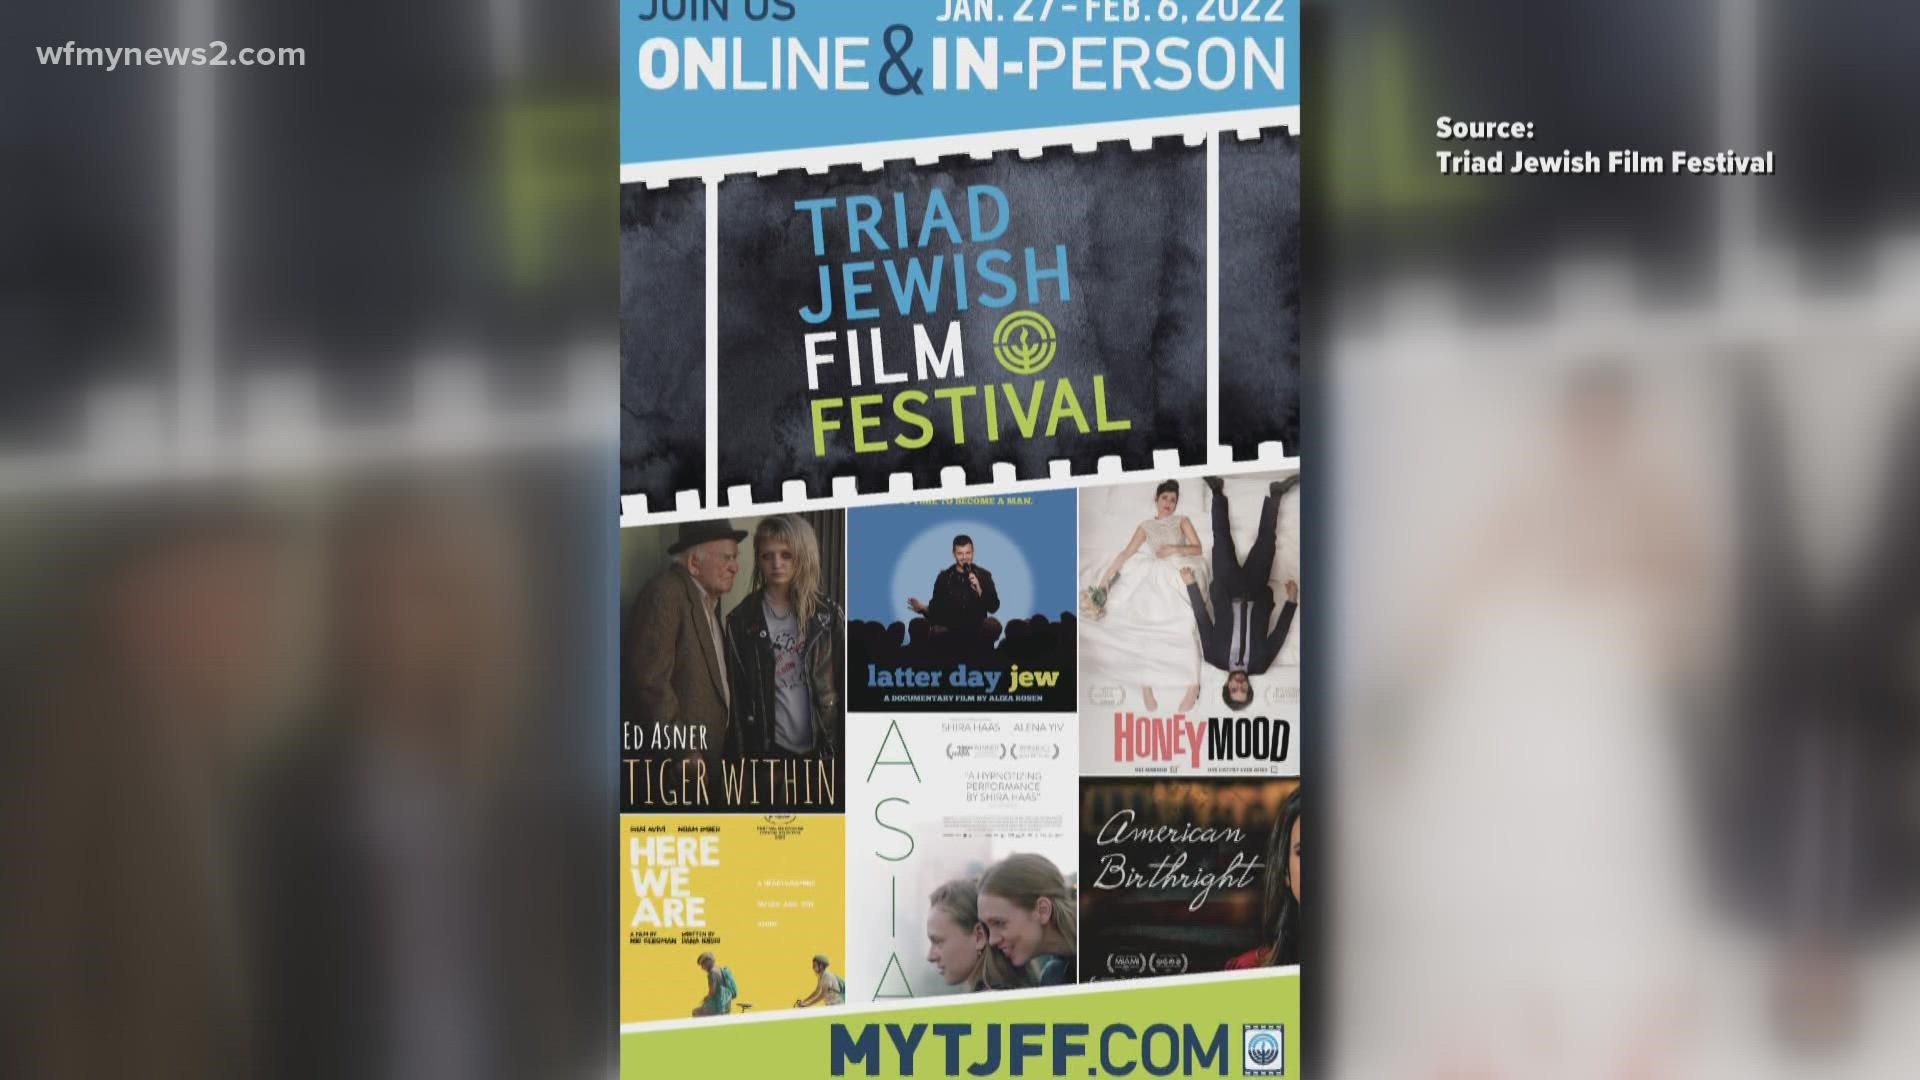 The Triad Jewish Film Festival started 21 years ago when other federations started their own film festivals.